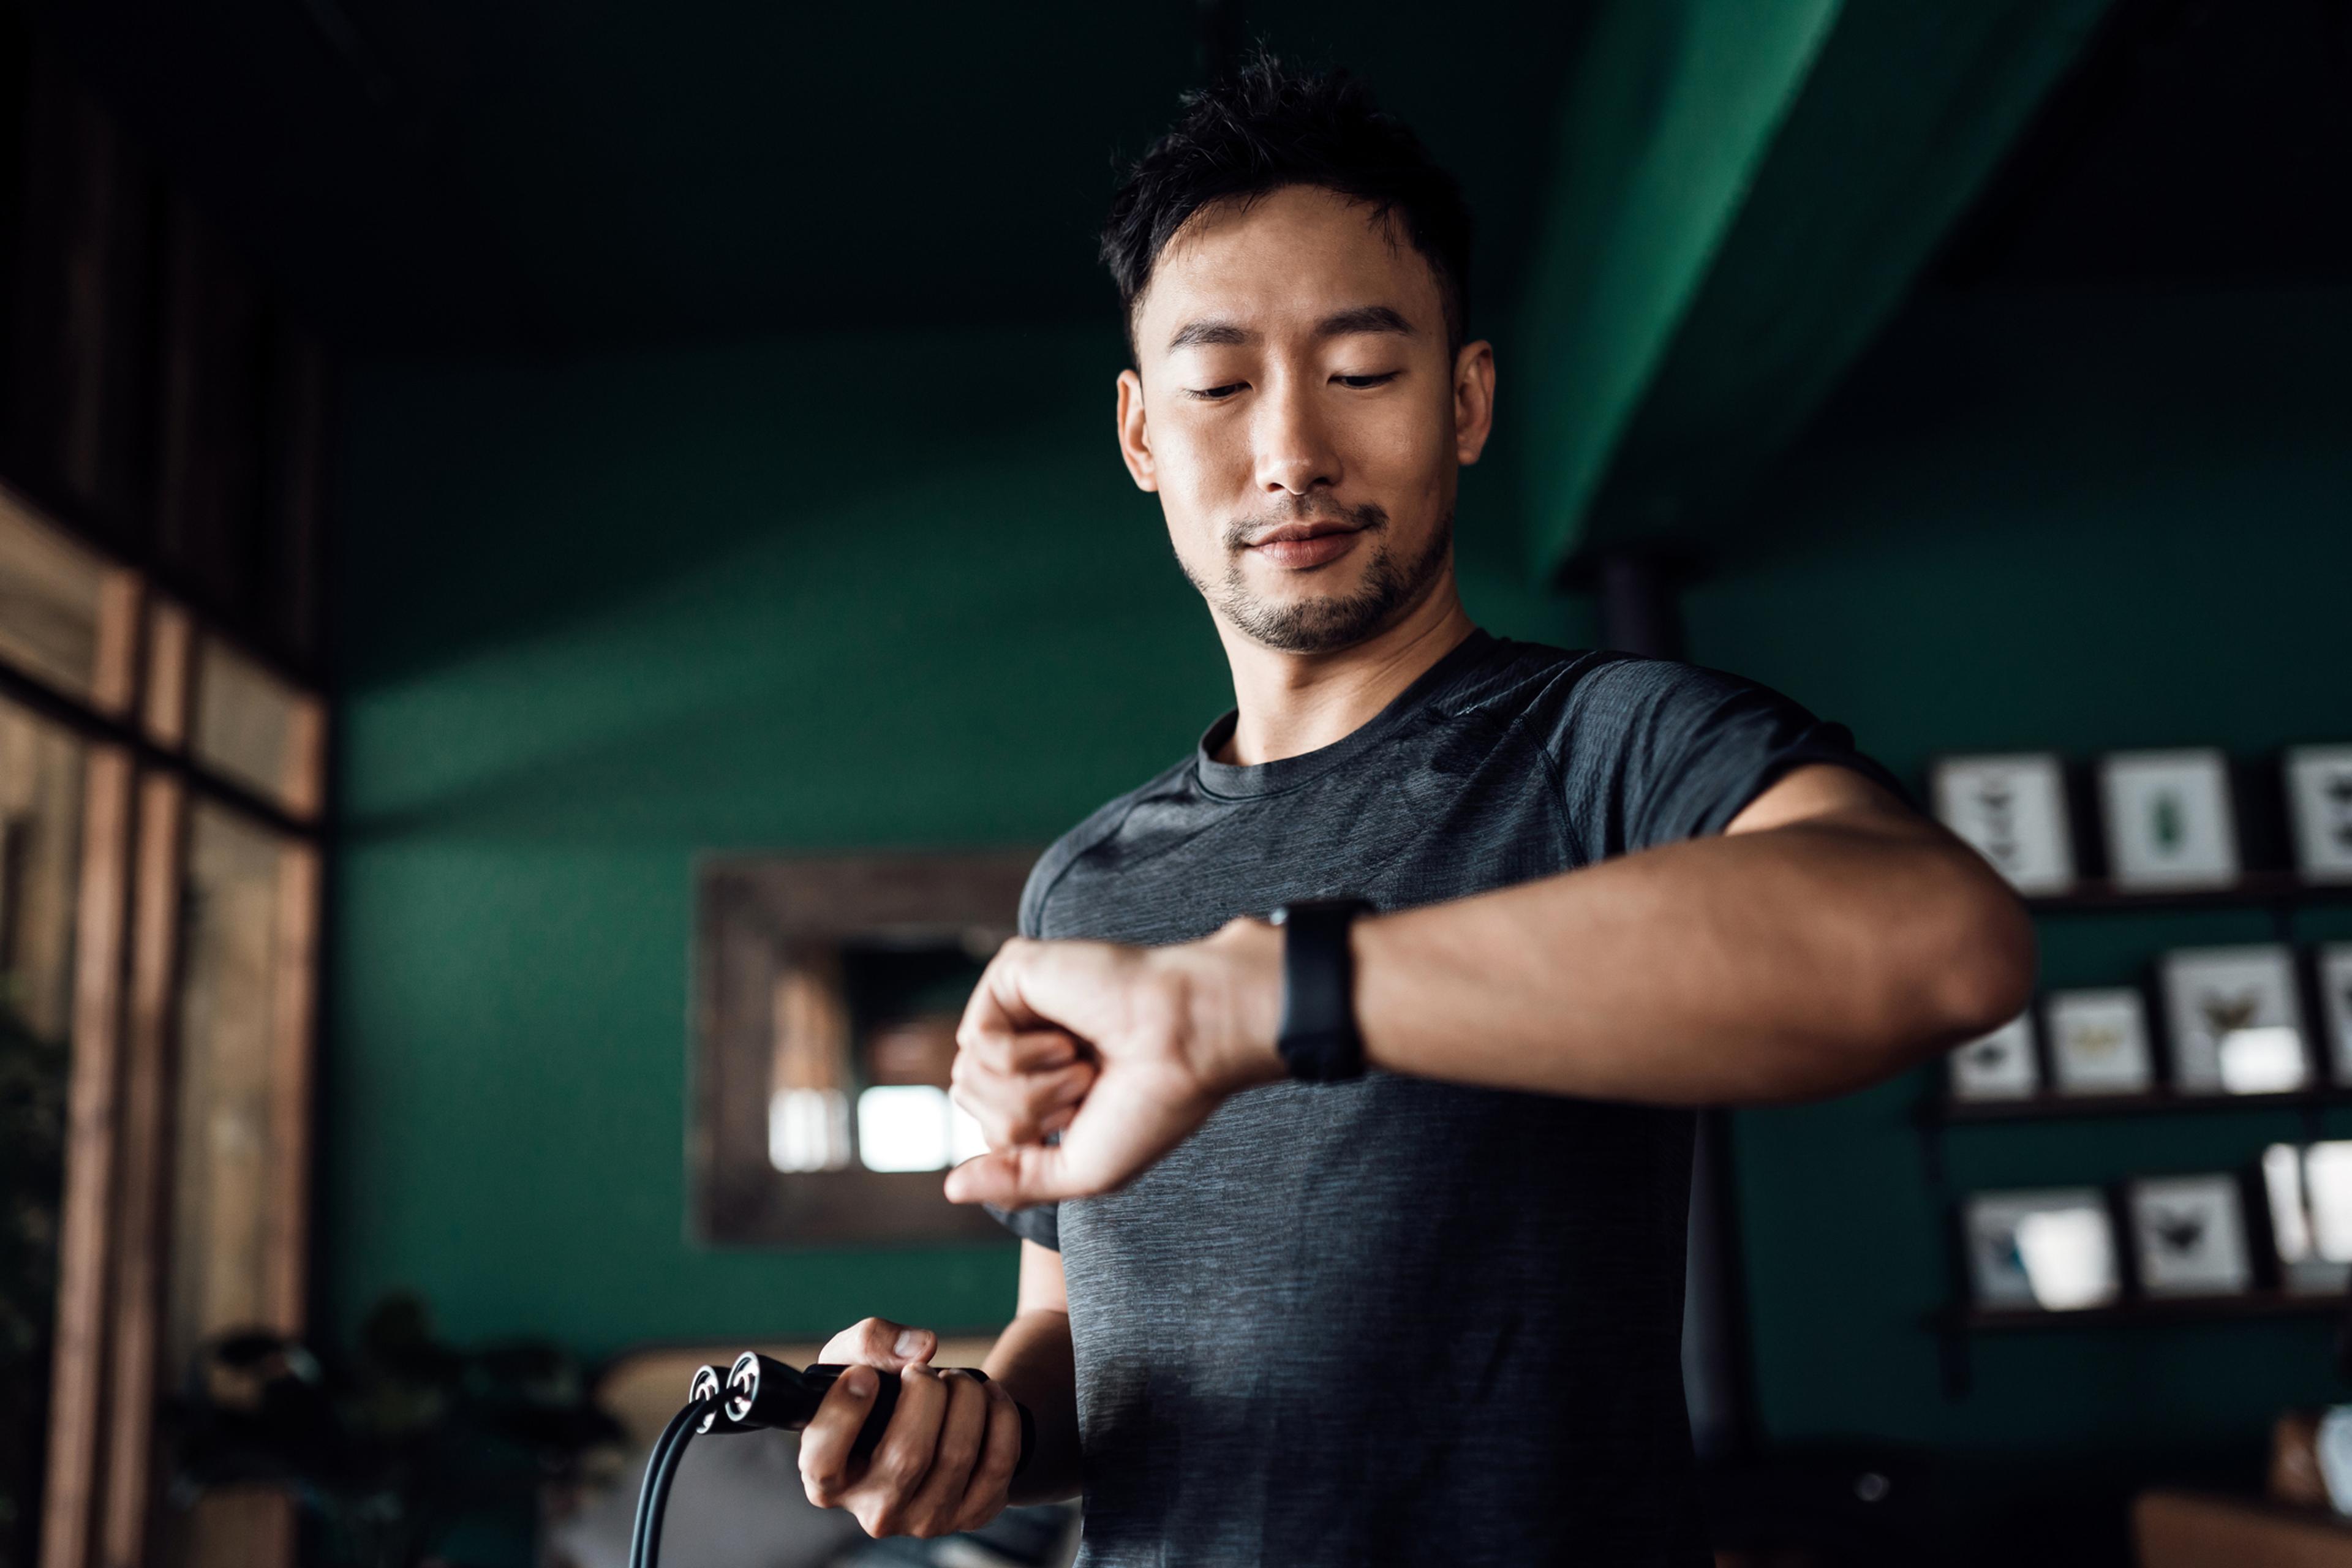 An active Asian man exercising at home uses a fitness tracker app on a smartwatch to monitor training progress and measure pulse.